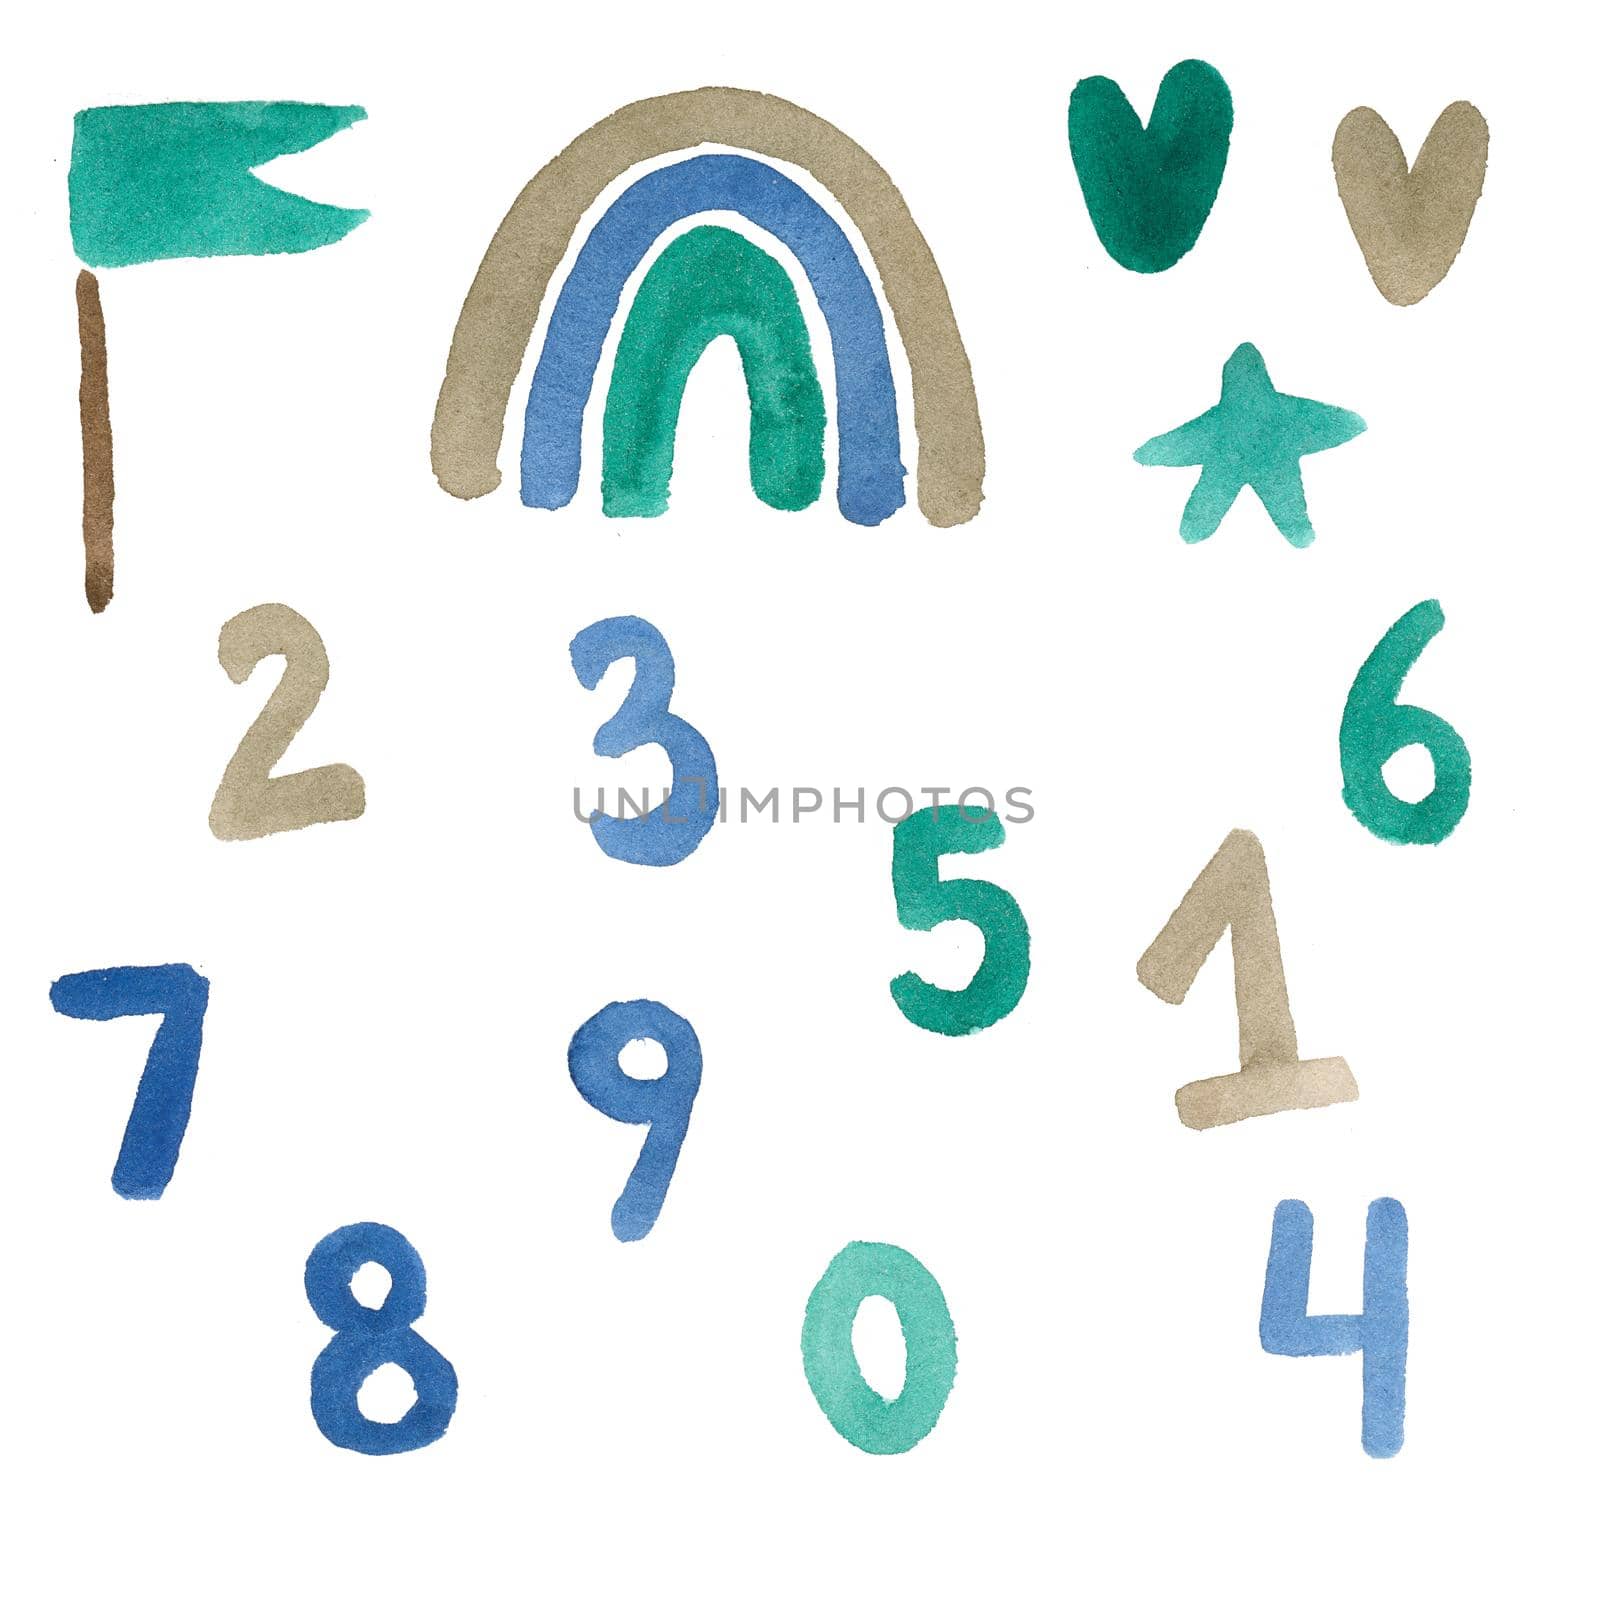 Watercolor set of numbers from 1 to 9. Symbols for invitations, banners, drawings, postcards. Isolated objects on a white background in turquoise blue.